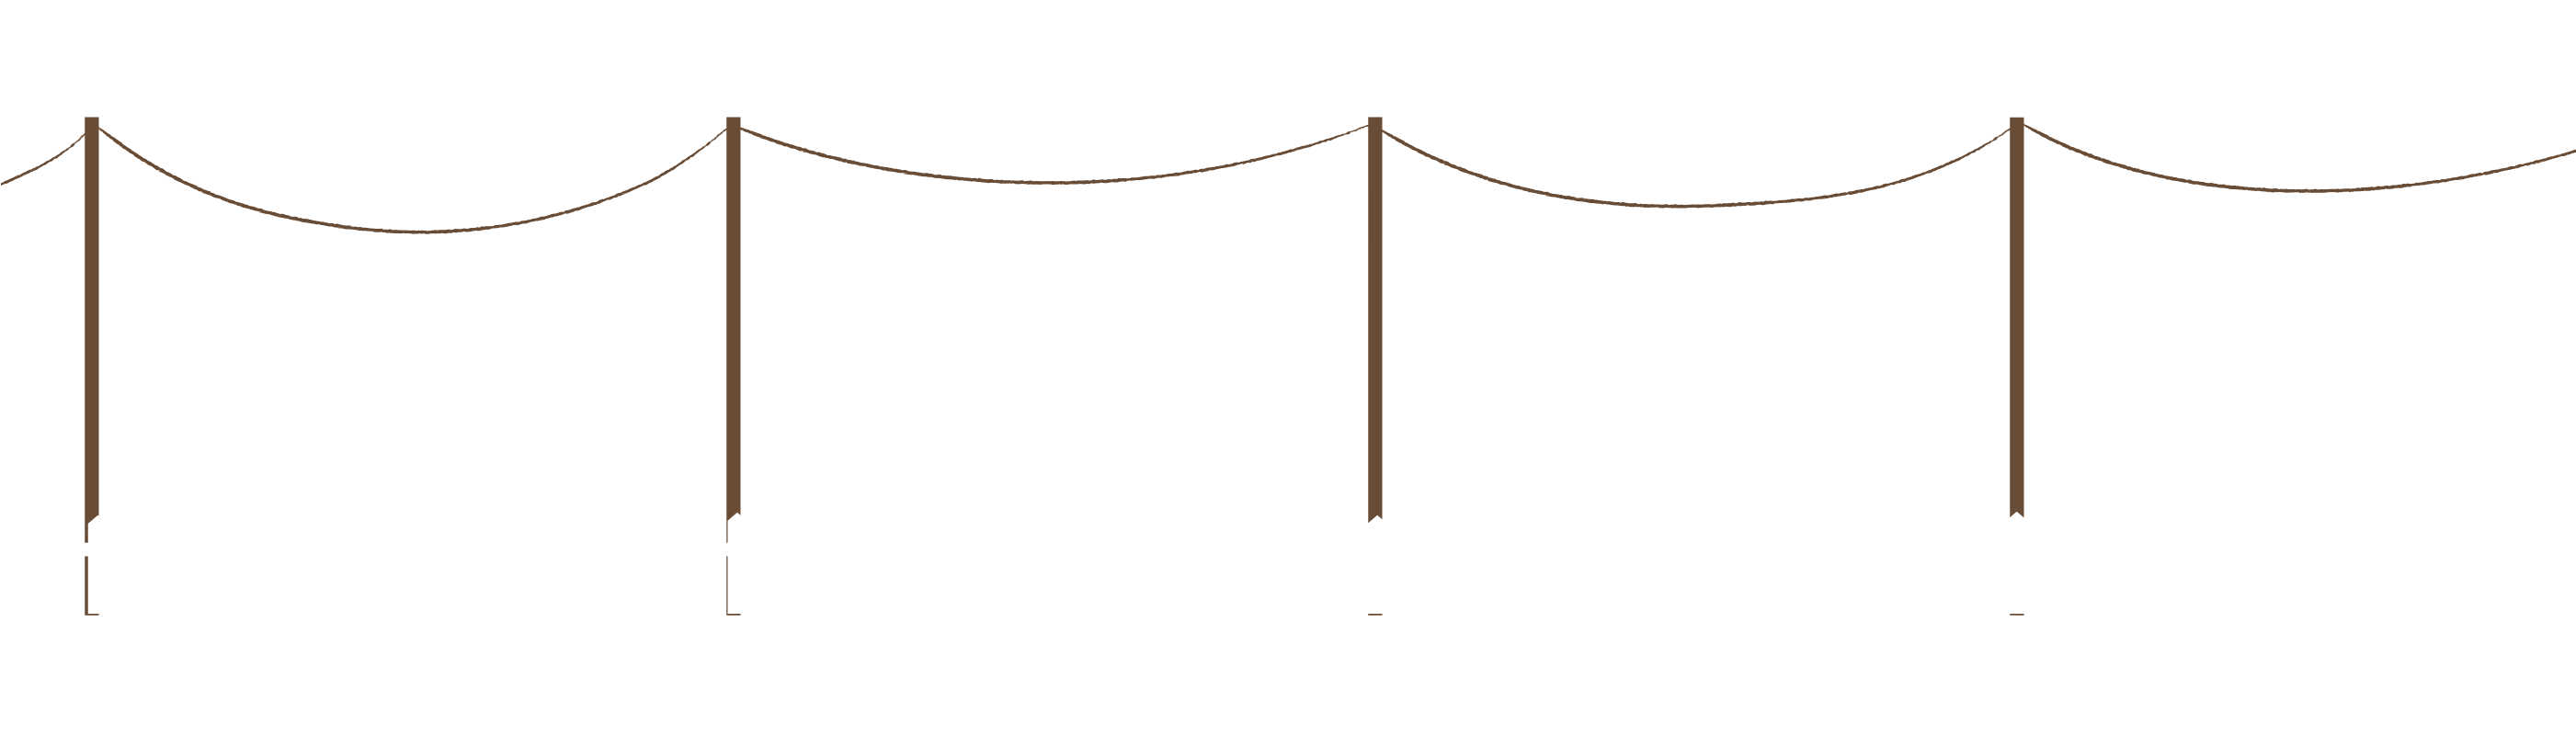 An illustration of four white clouds, four brown utility poles with lines between them and a white picket fence